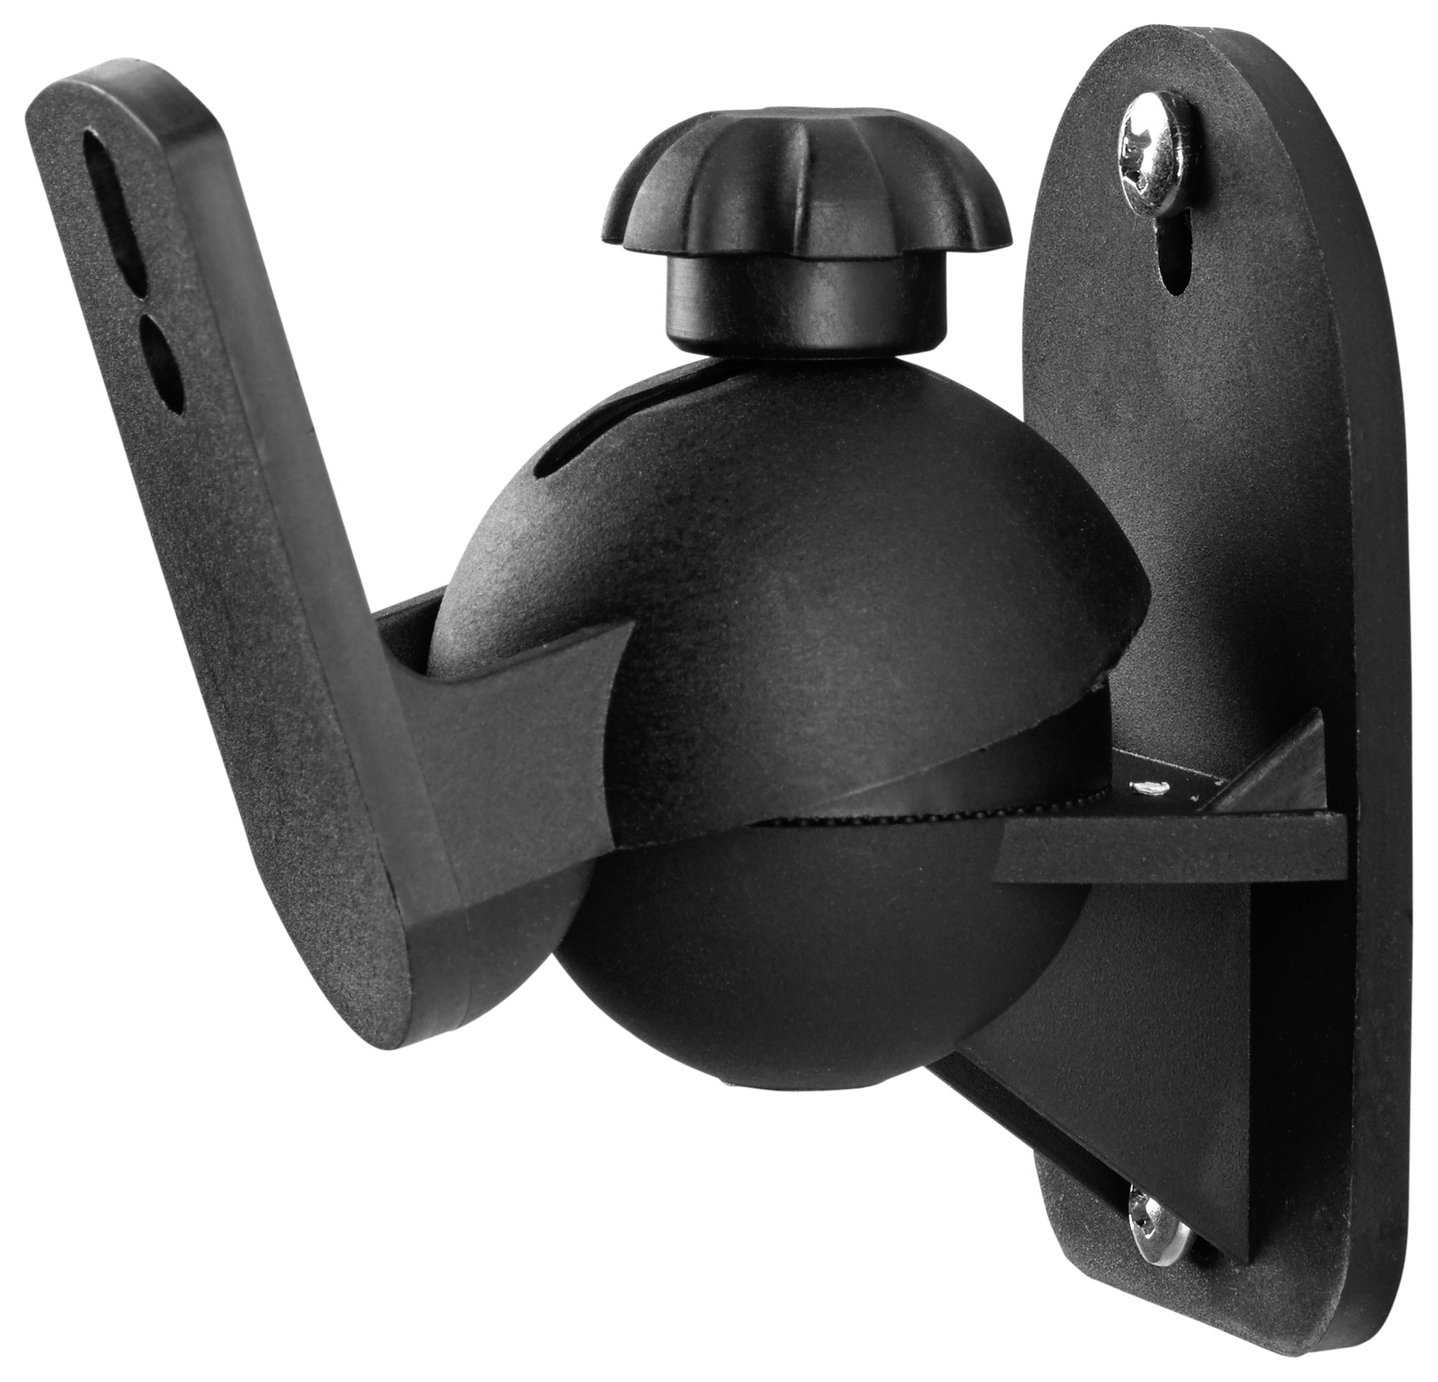 One For All WM5330 Universal Speaker Wall Mount